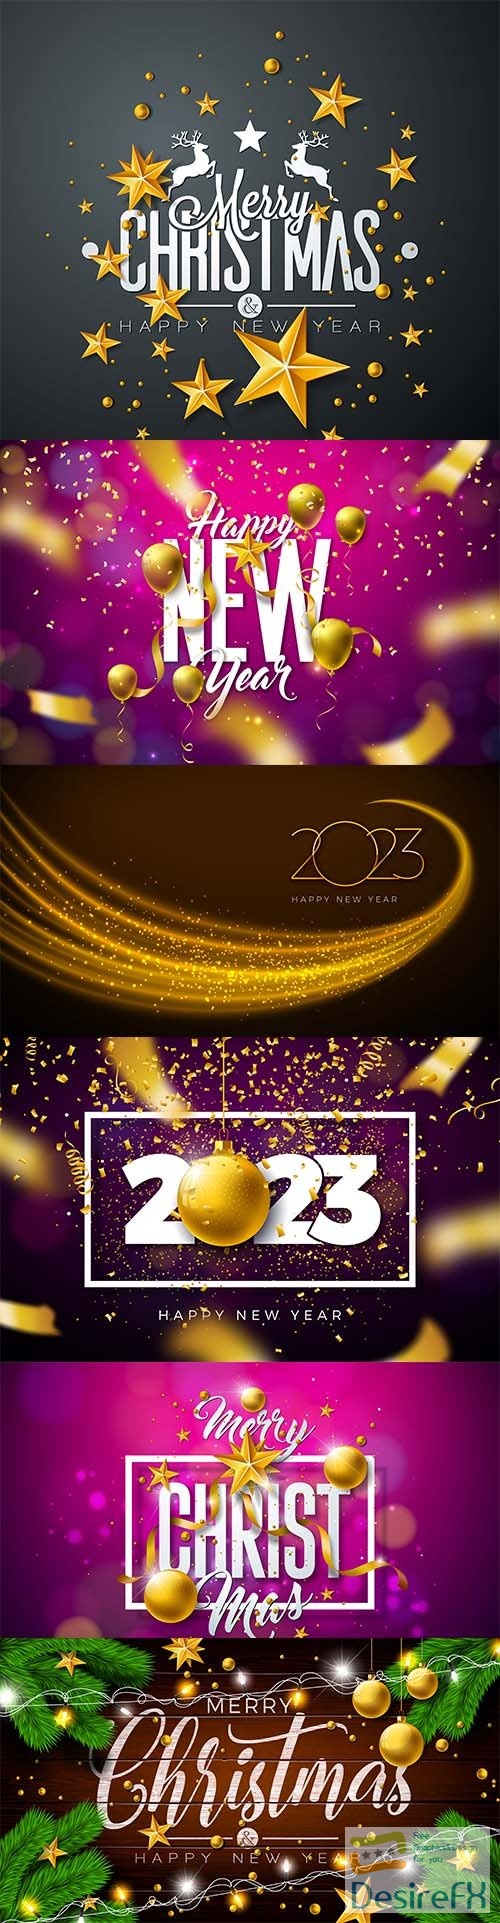 Merry christmas and happy new year illustration with gold glass ball, star and light garland